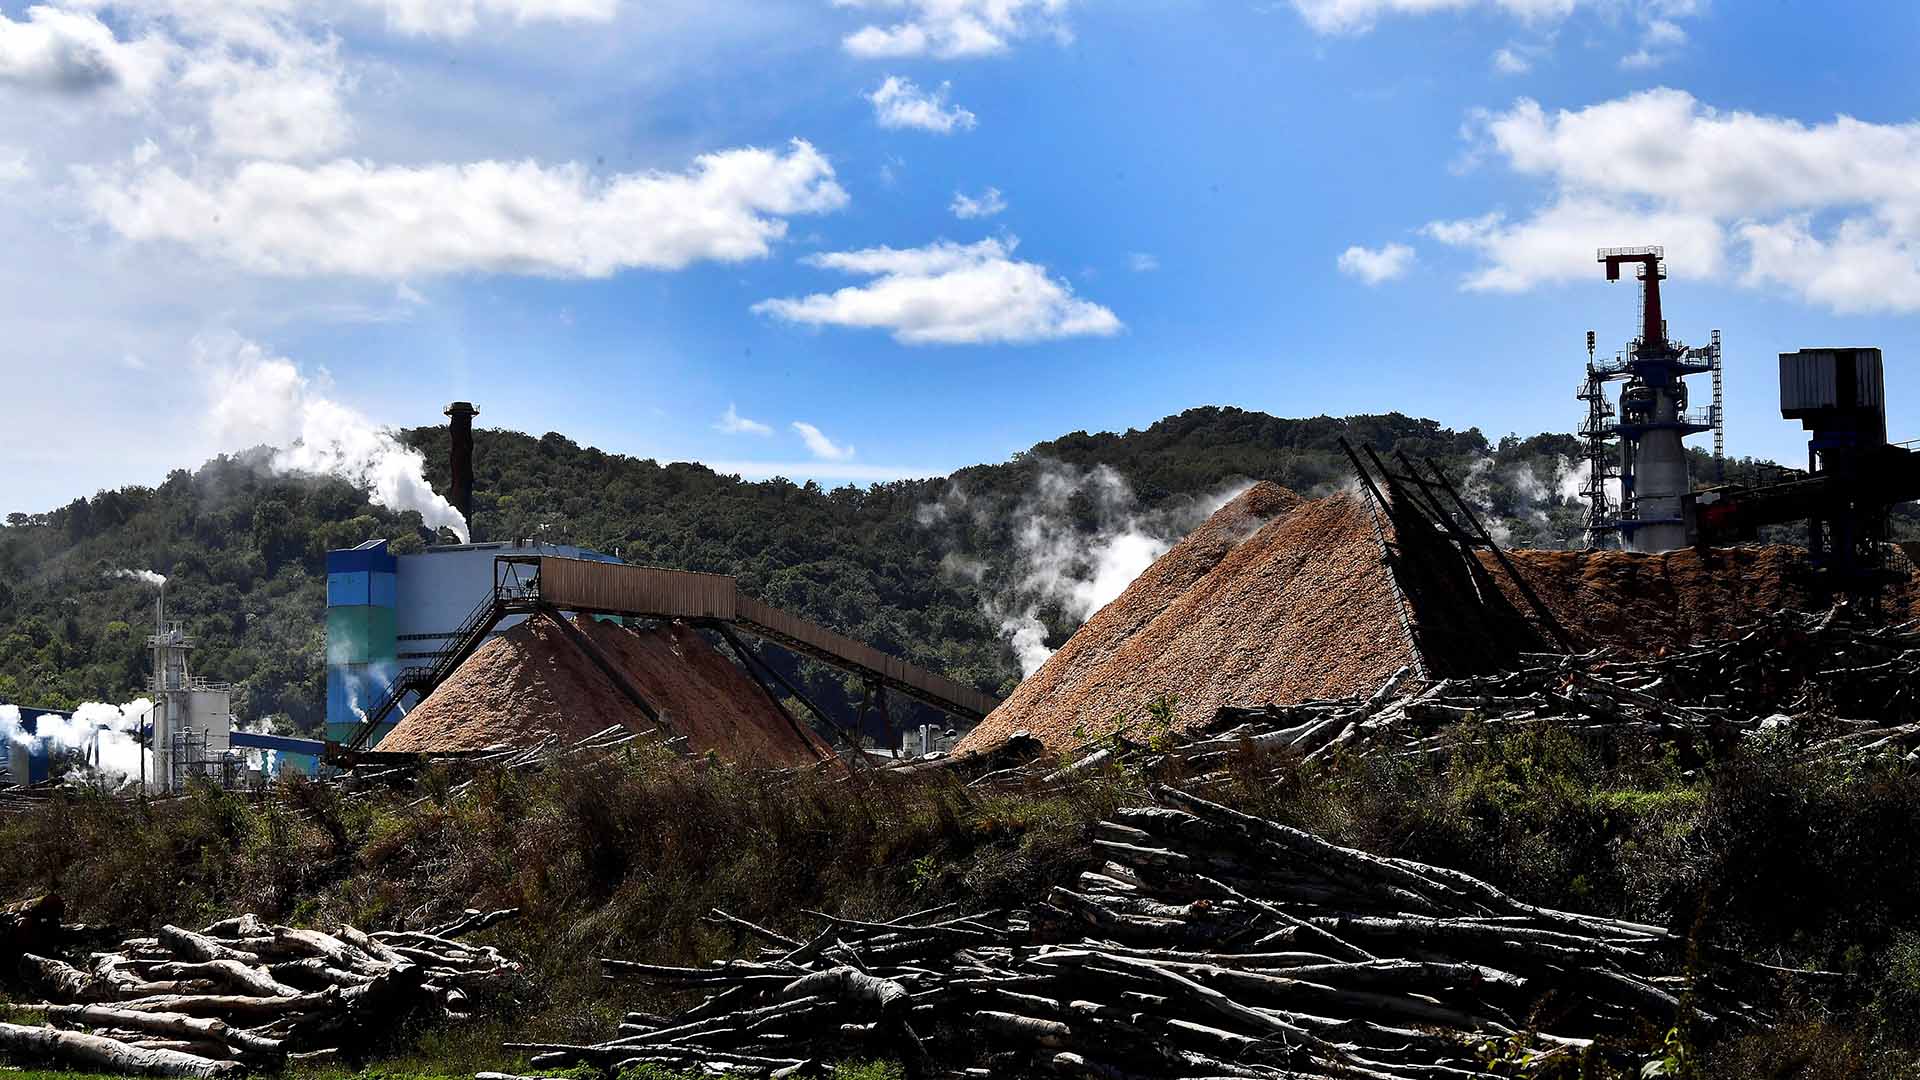 Wide photo showing logs and a factory mill against a blue sky.